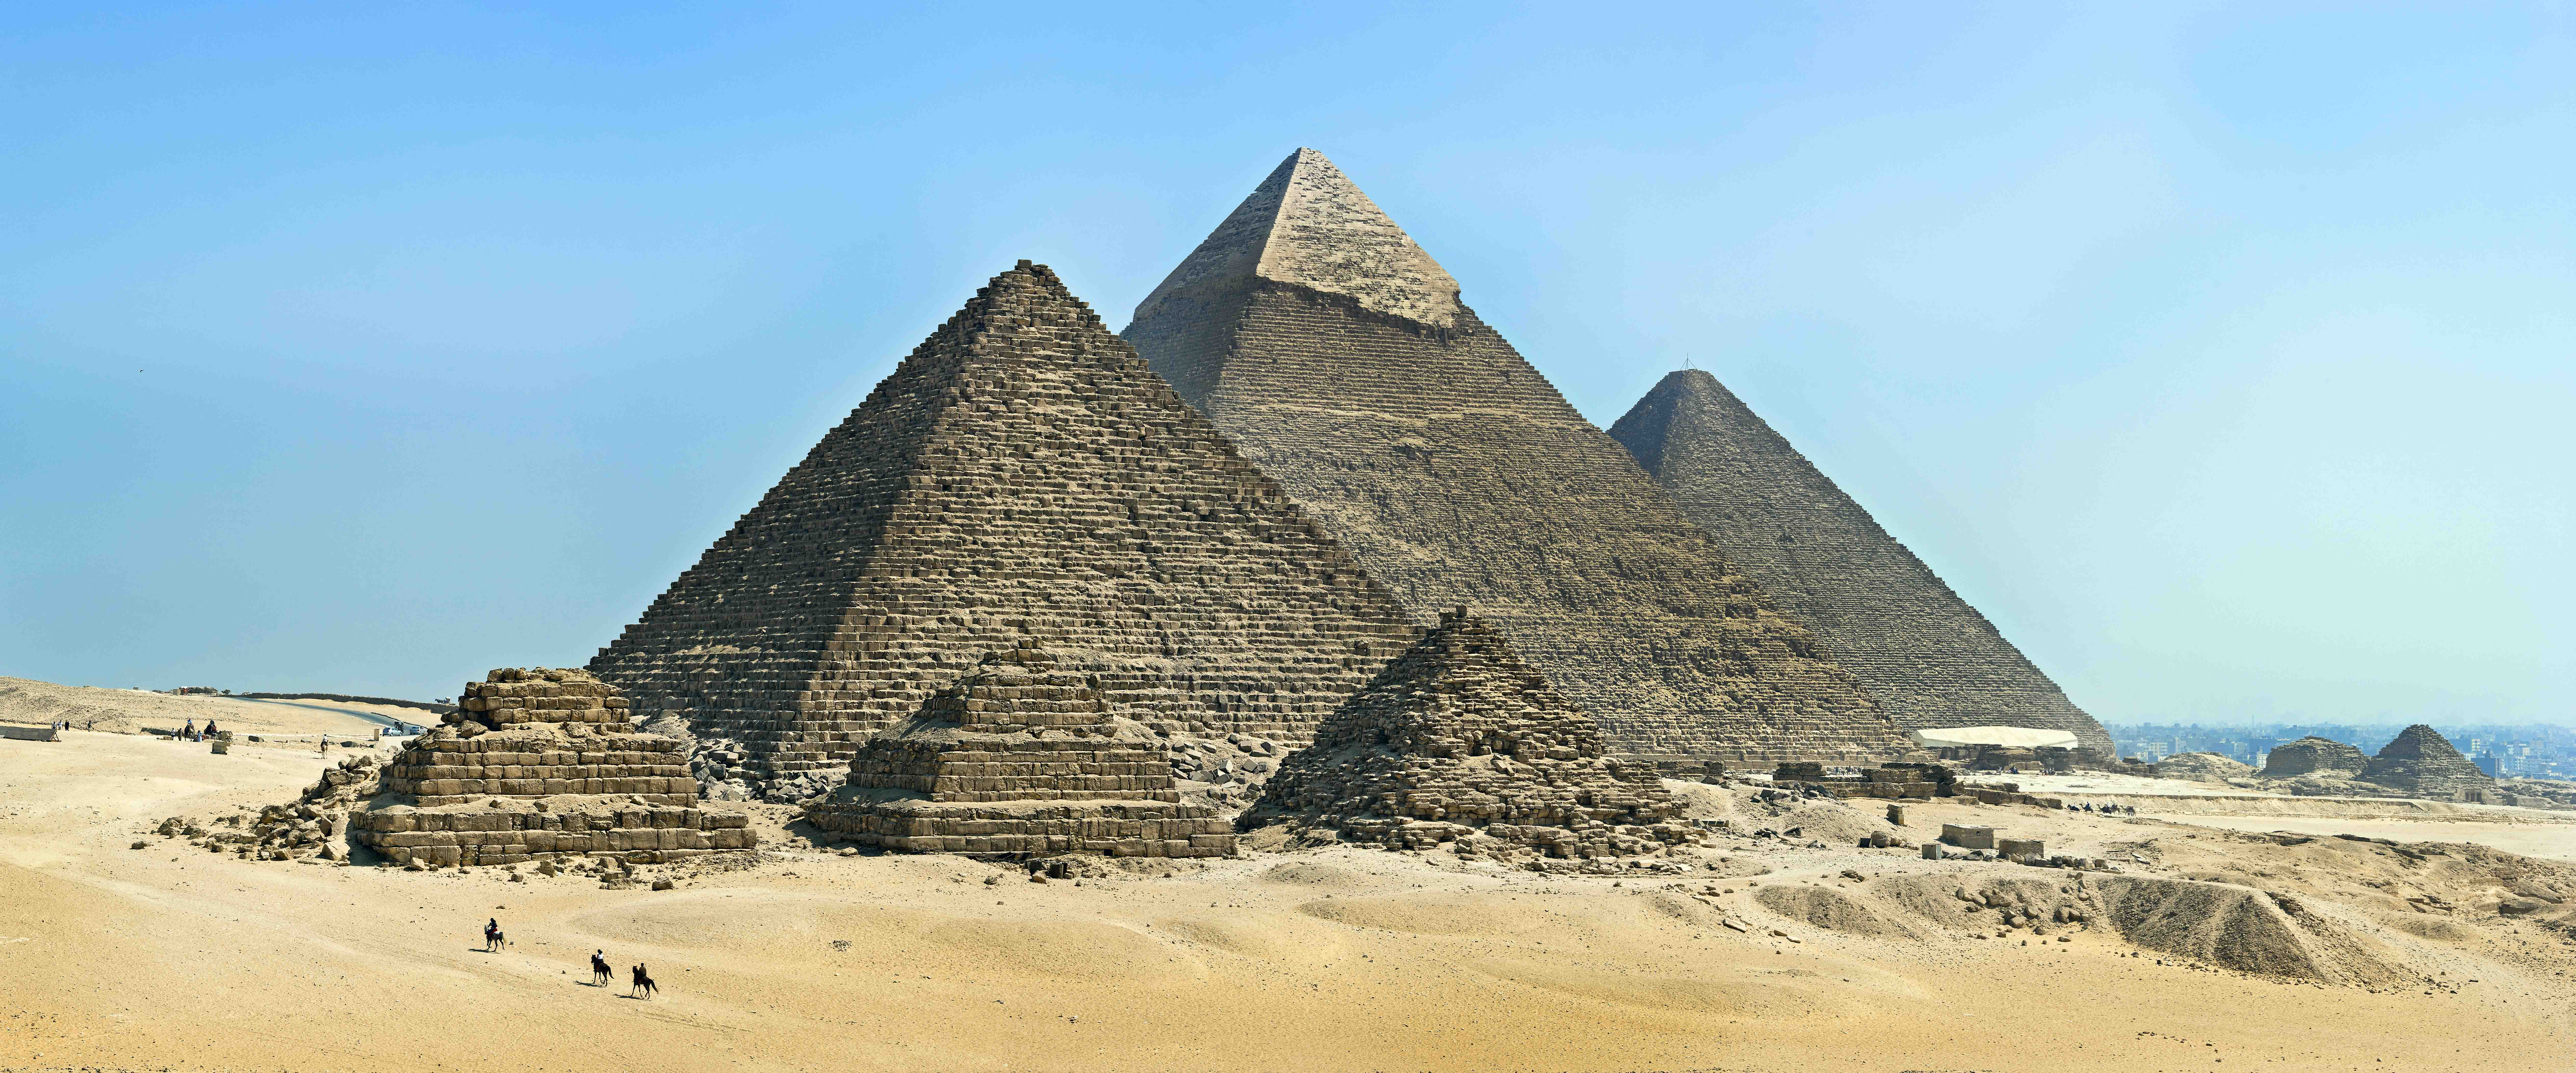 Names of pyramids in egypt